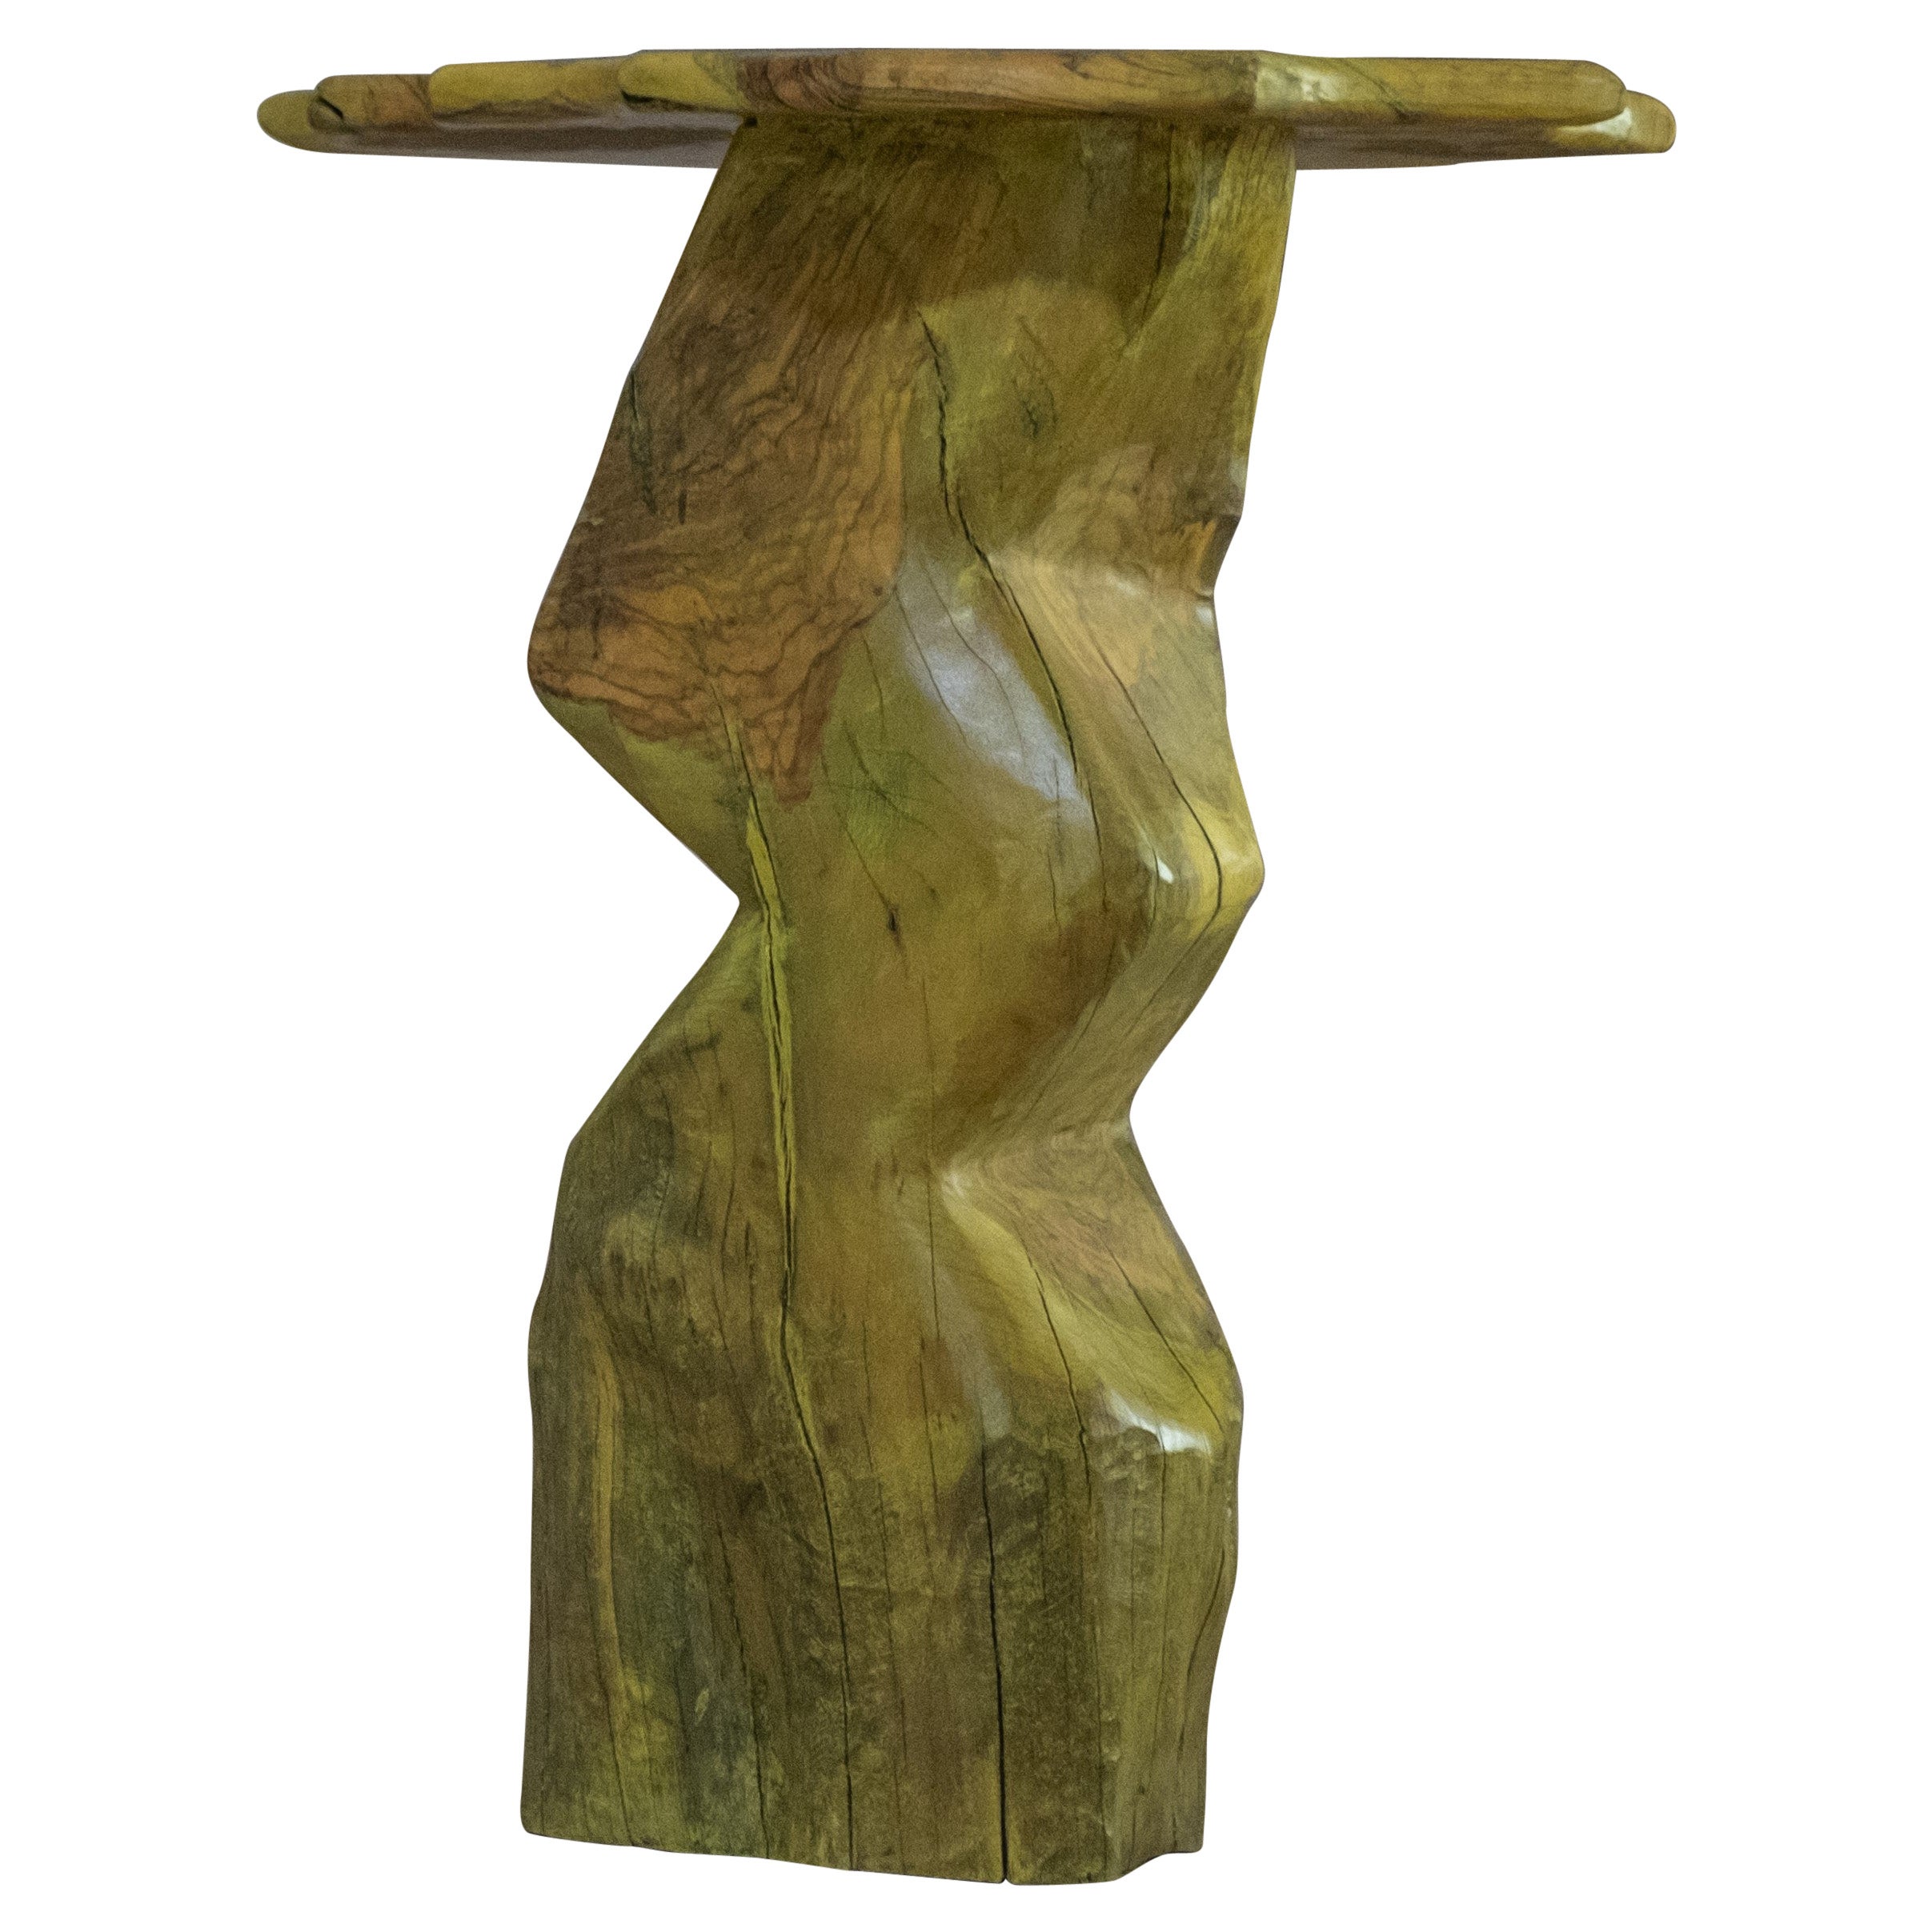 Unique Olive Wood Side Table by BehaghelFoiny